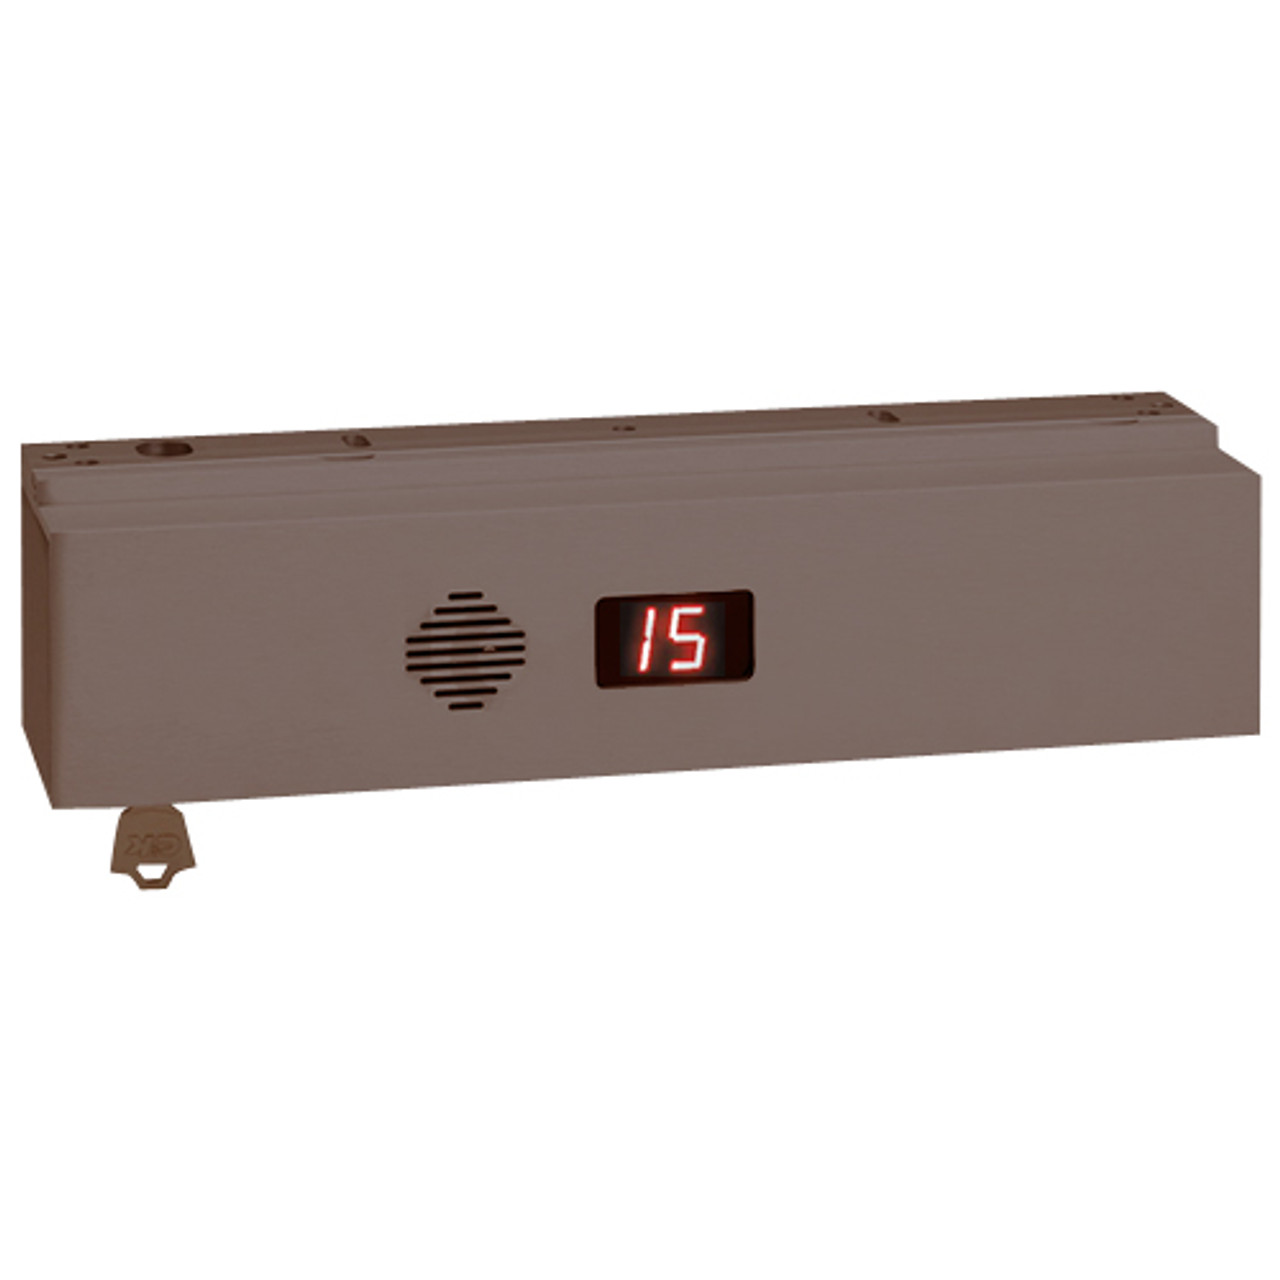 1511S-BC-K-X-BA SDC 1511S Series Single Integrated Delayed Egress Locks with Magnetic Bond Sensor and Anti-Tamper Switch in Dark Bronze